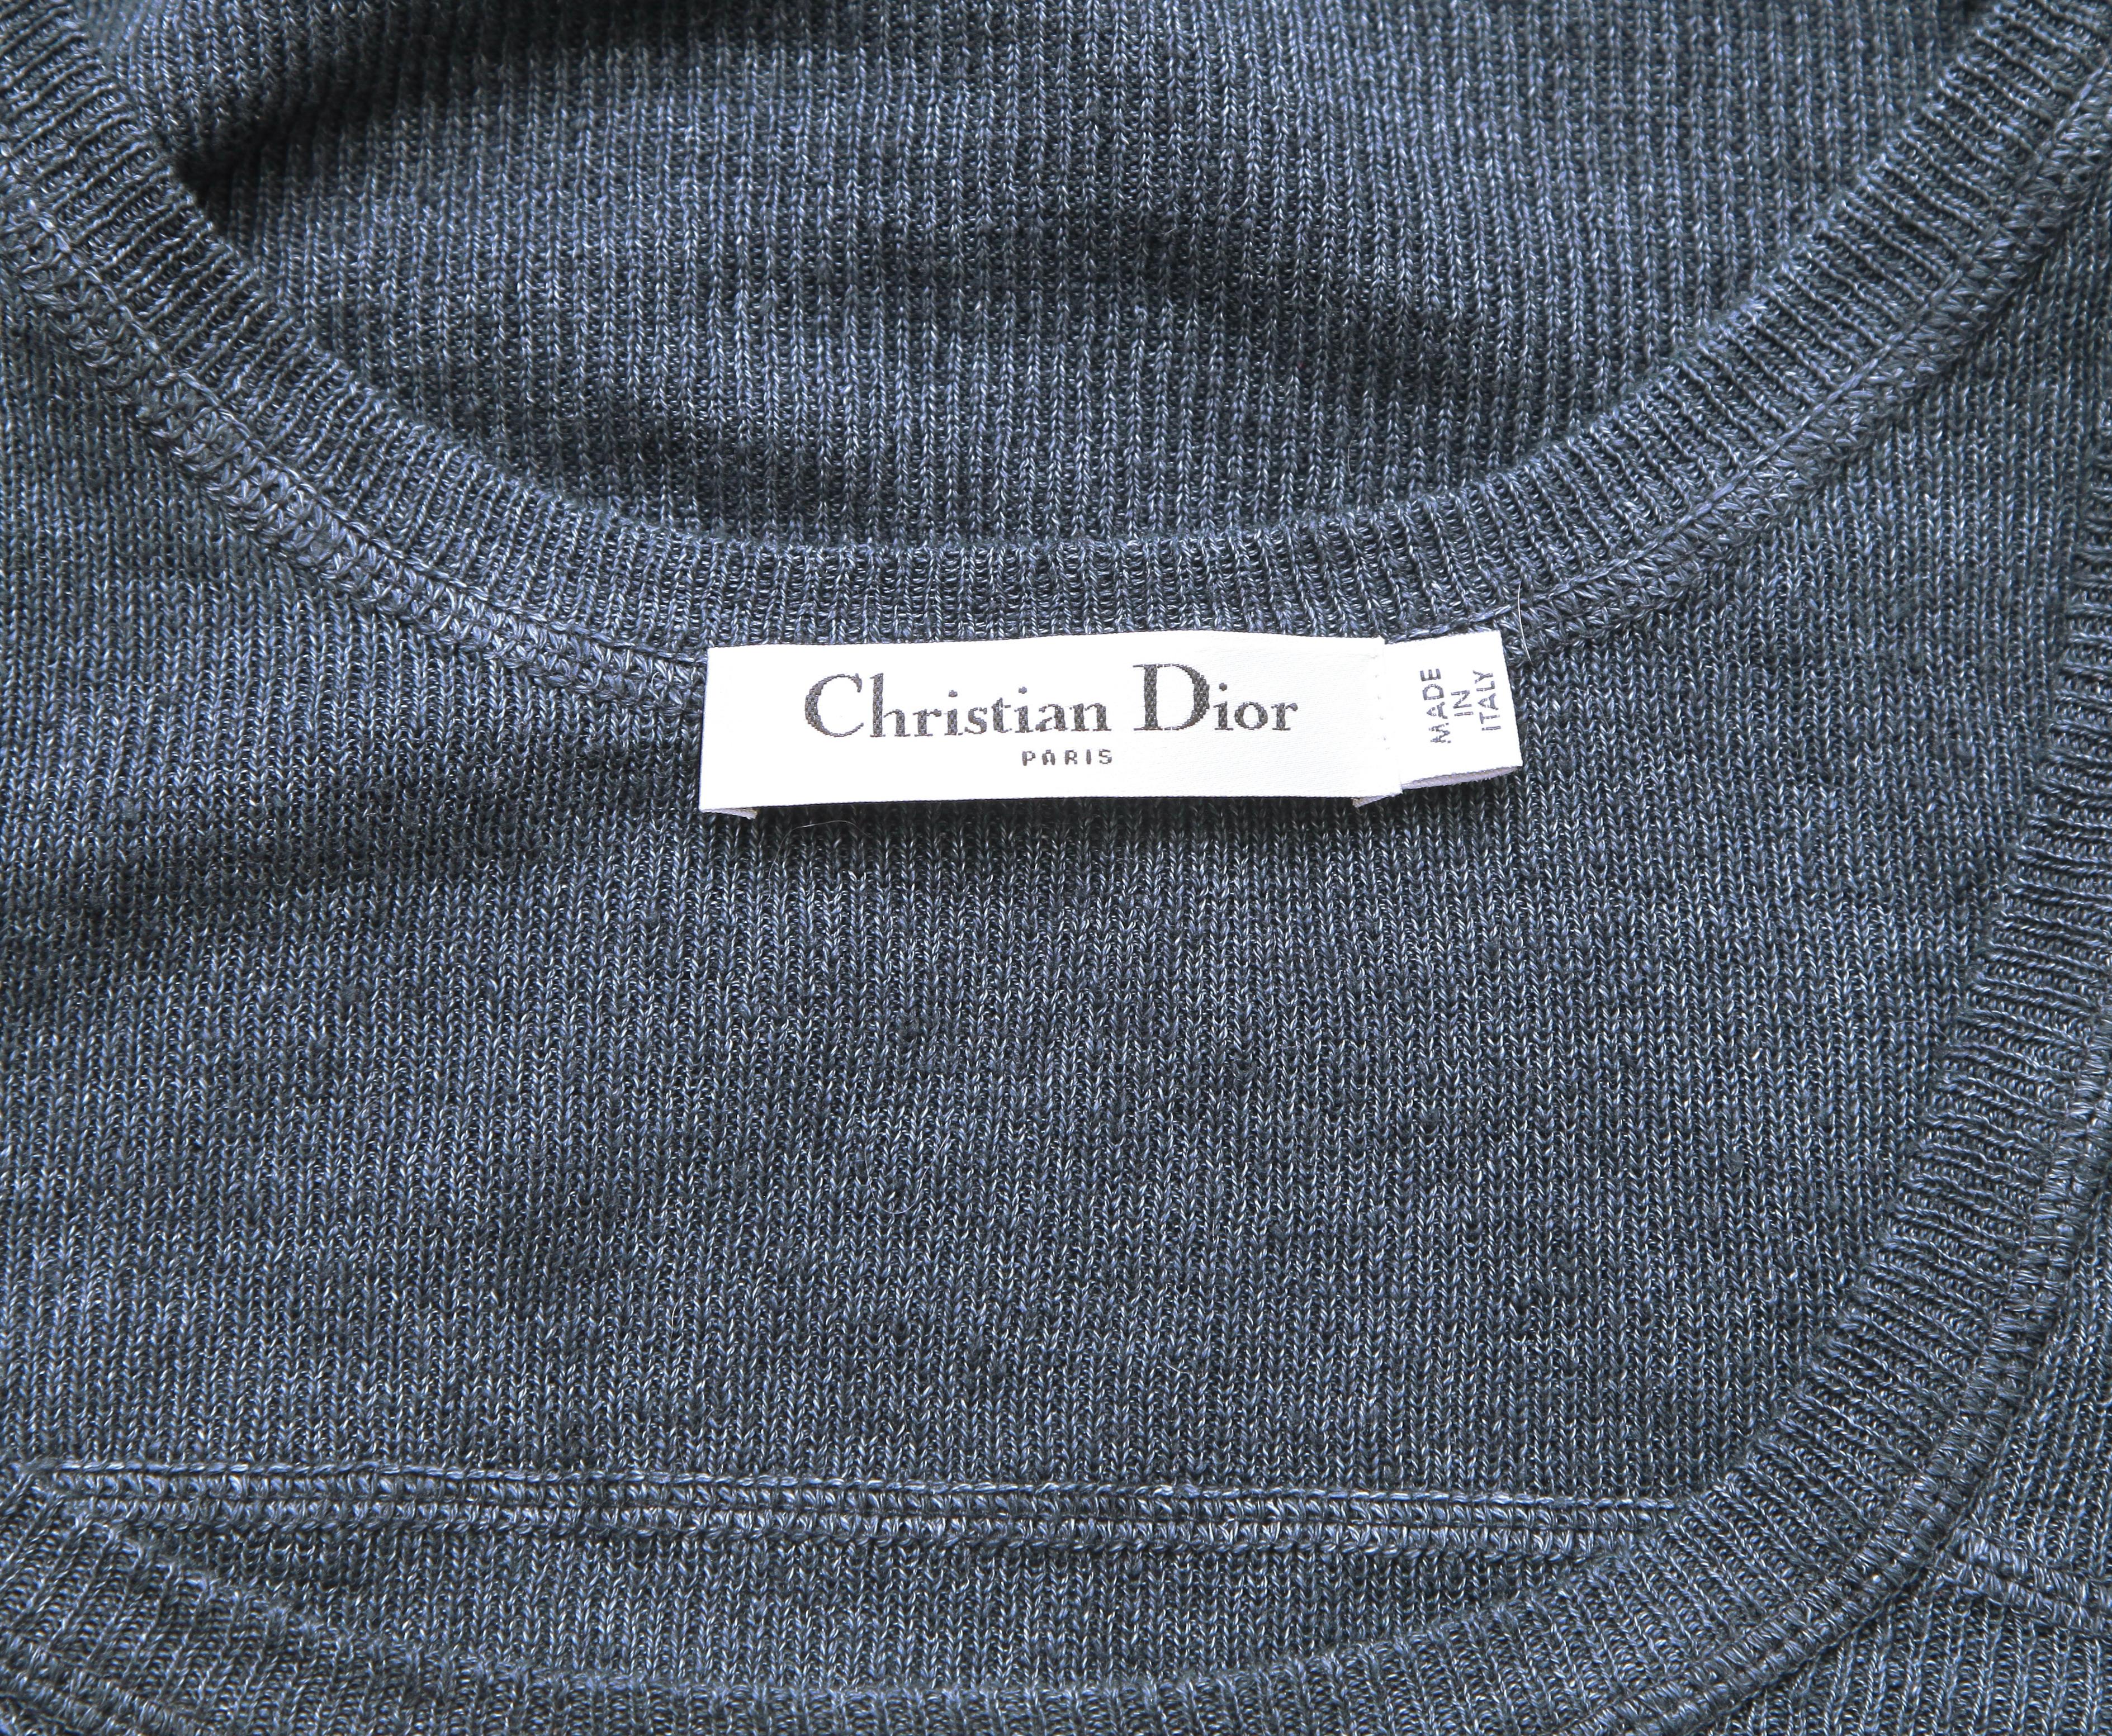 CHRISTIAN DIOR Sleeveless Knit Sweater Top Navy Blue Ribbed Shirt Sz 36 For Sale 1